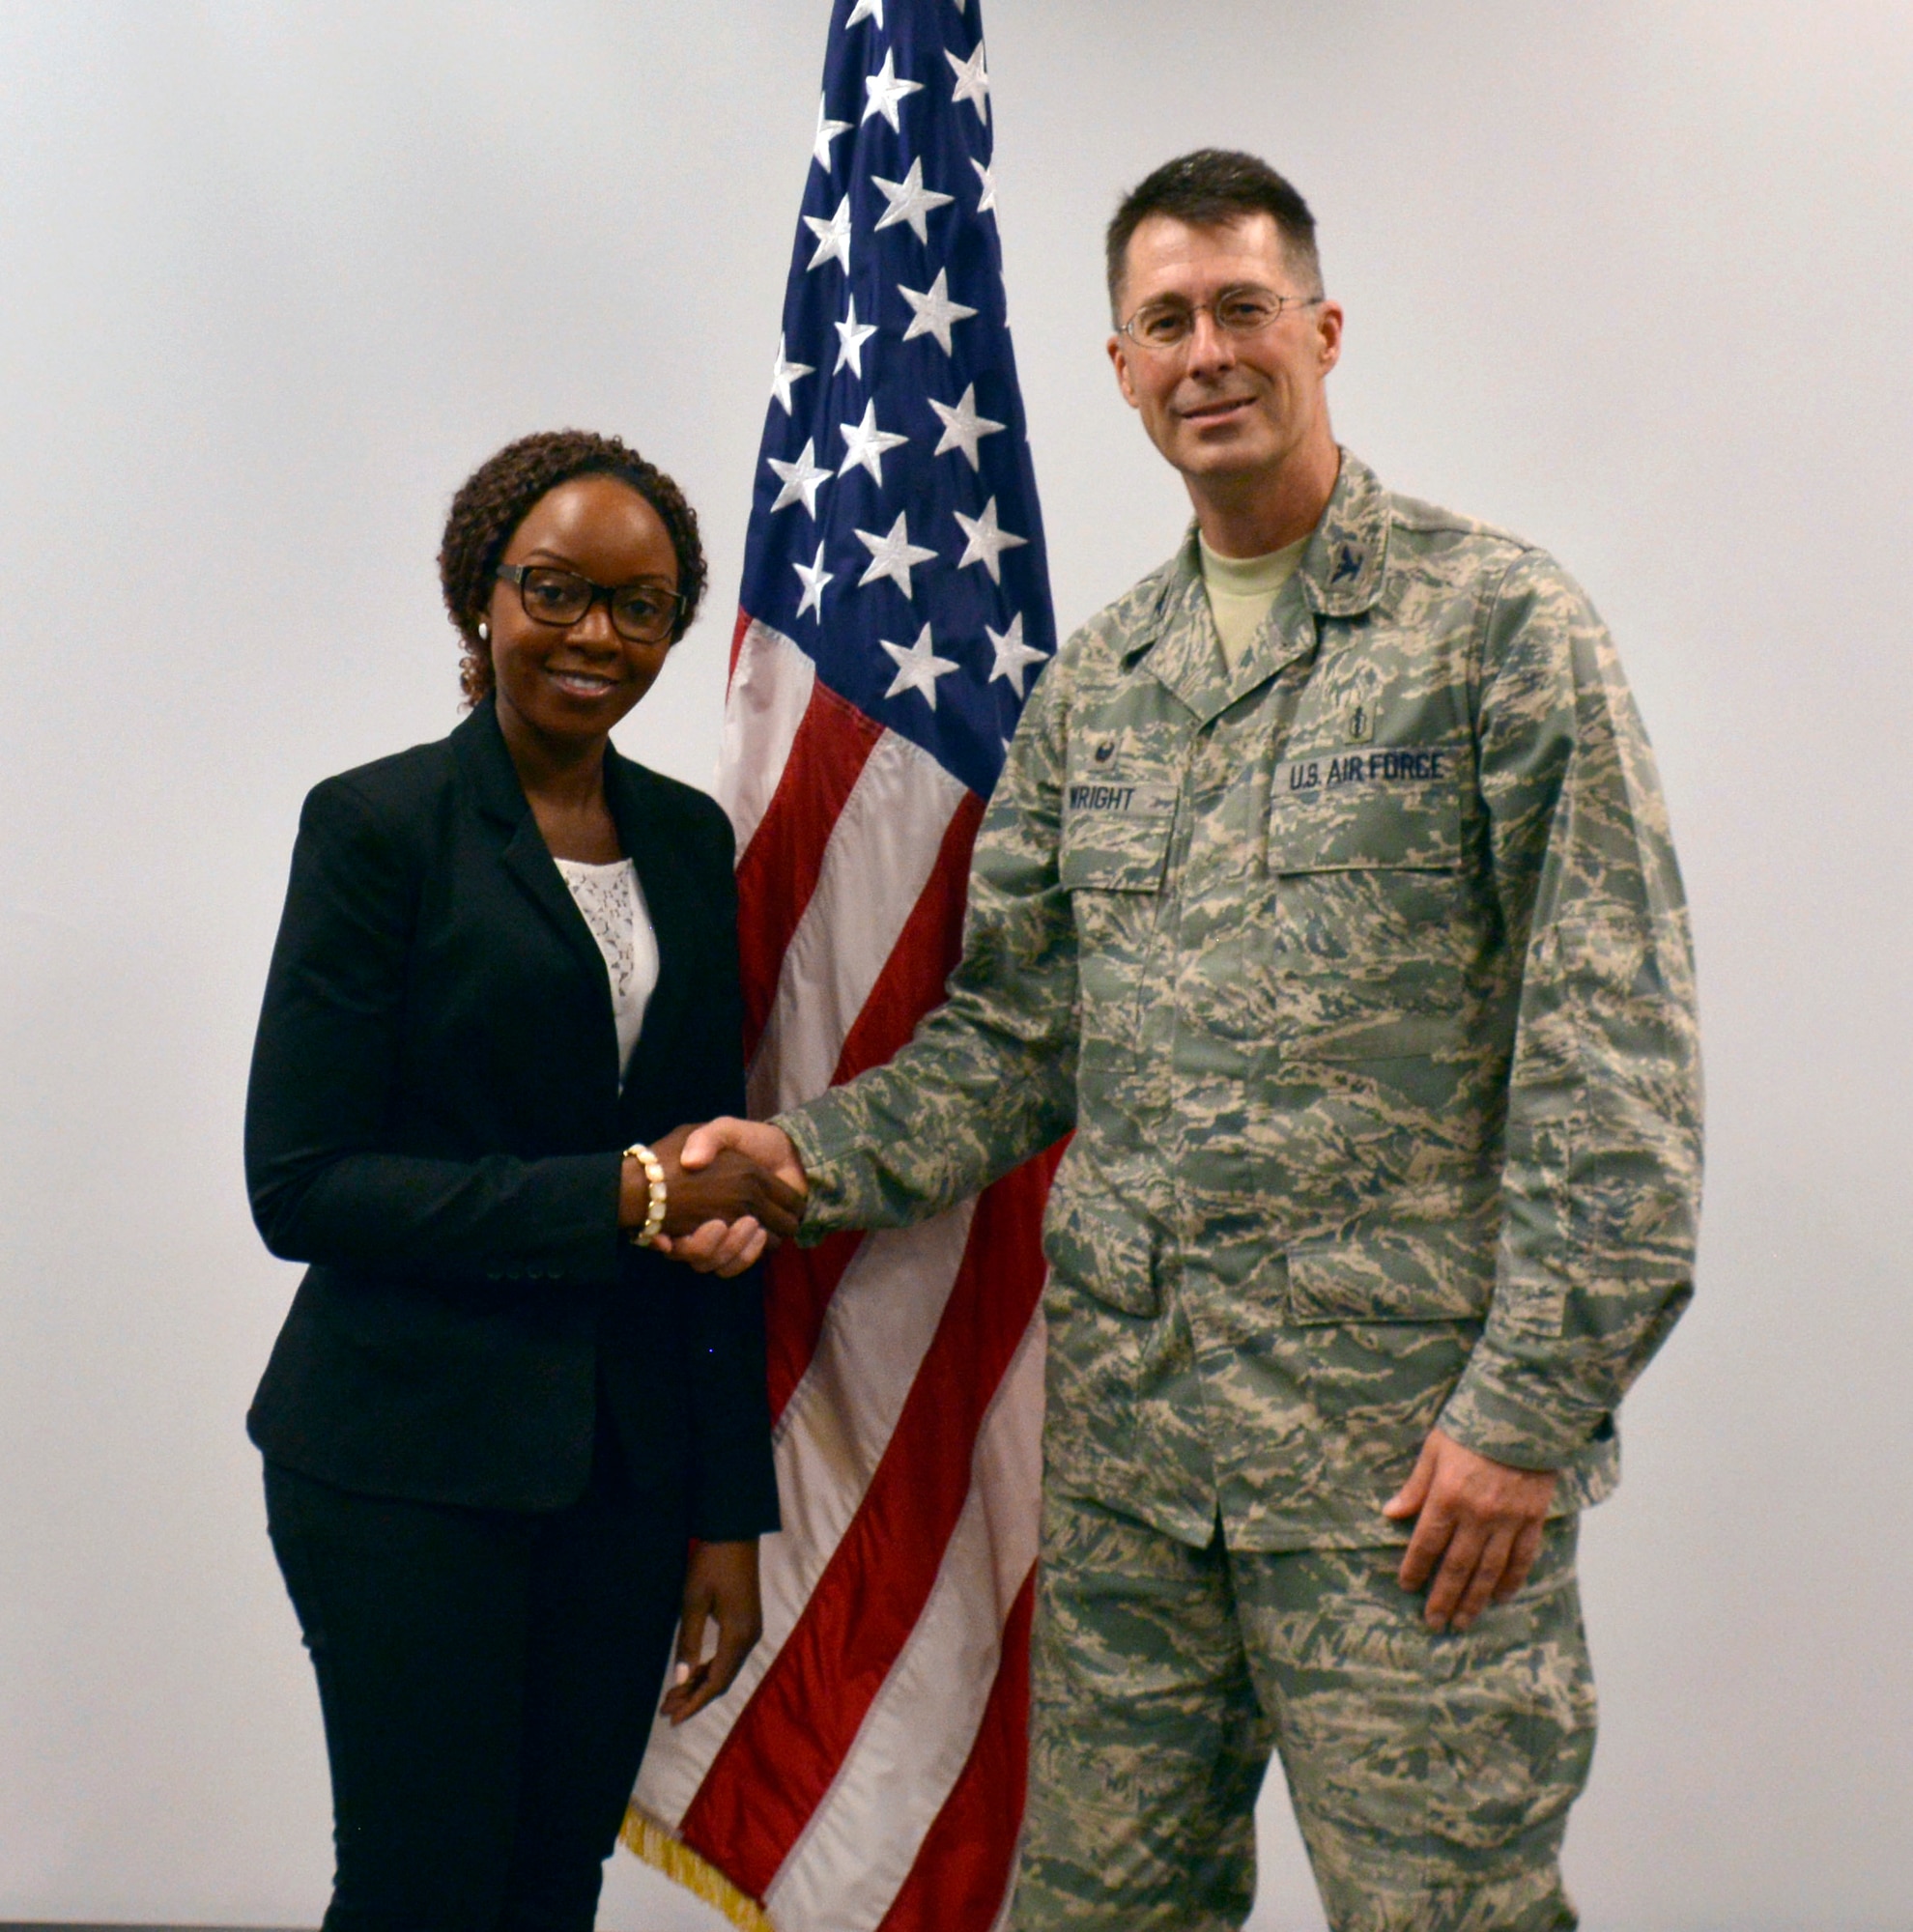 Col. (Dr.) Kenneth Wright, right, the 482nd Medical Squadron commander, Capt. (Dr.) Rachael Nambusi, left, a new physician at the 482nd MDS, pose for a photo after Nambusi signed her application for the Air Force Reserve assignment at Homestead Air Reserve Base, Fla., Dec. 10, 2016. Nambusi is the first female physician at the 482nd MDS in over a decade. (U.S. Air Force photo by Senior Airman Aja Heiden)
